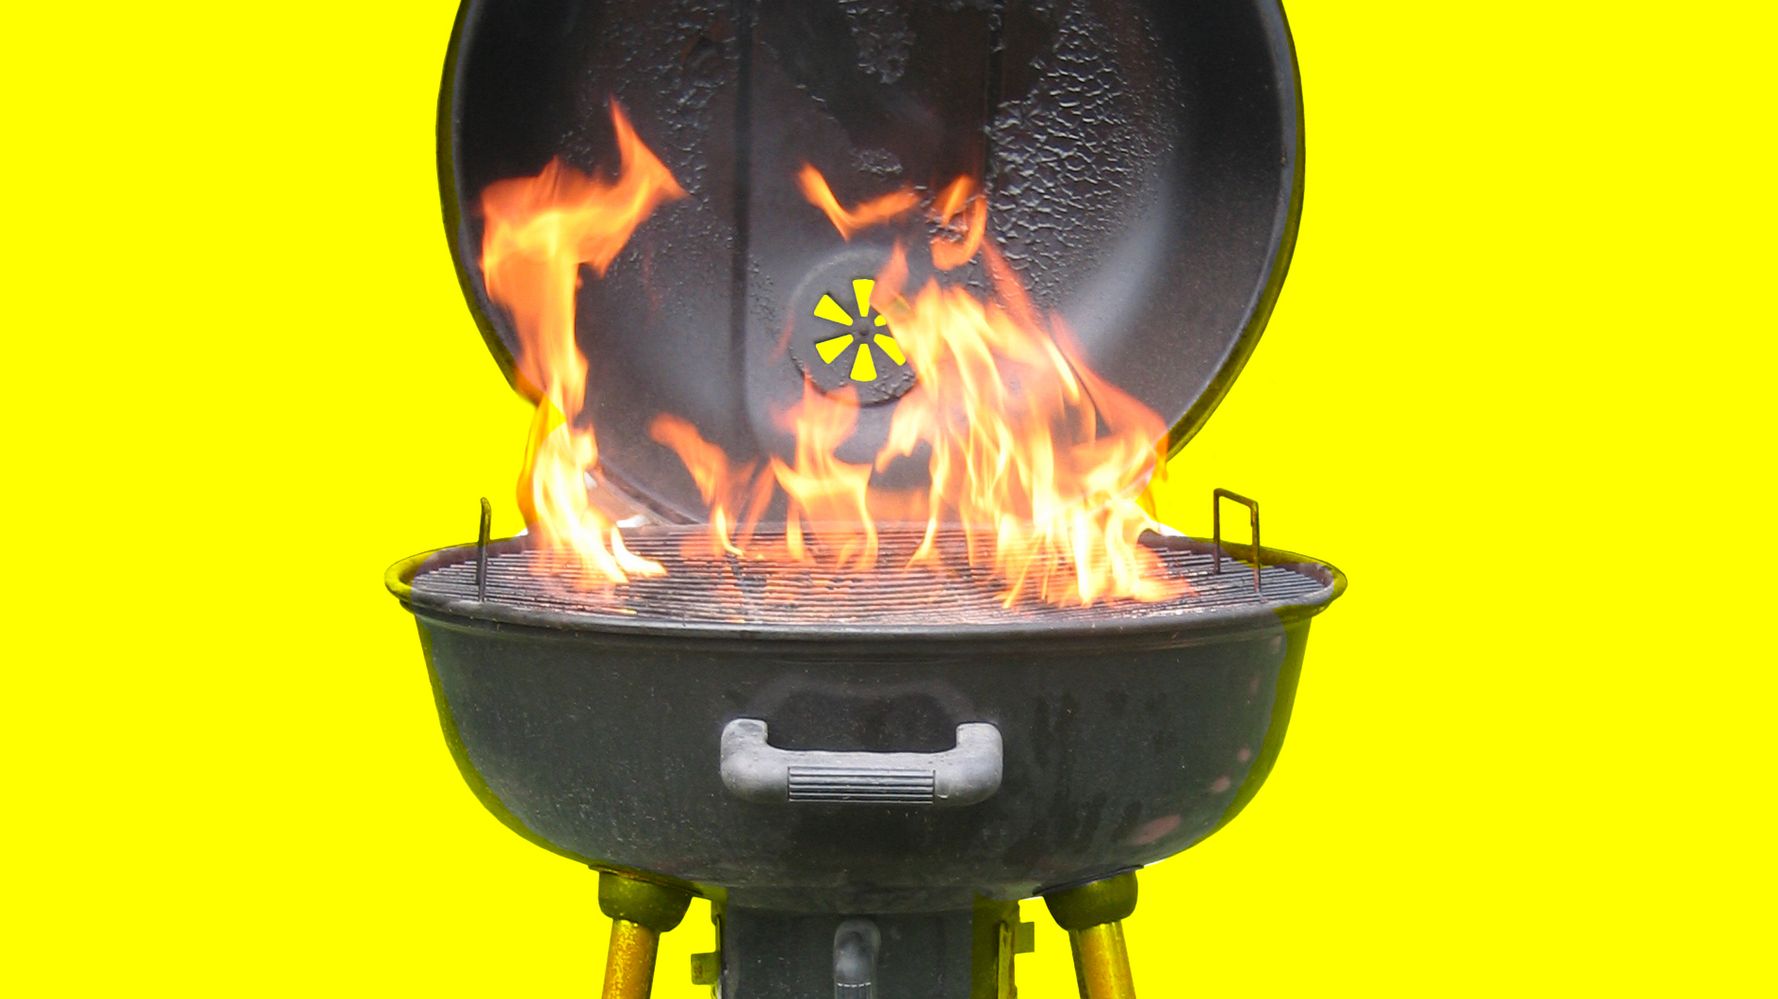 The Most Common Grilling Mistakes And How To Avoid Them Huffpost Life